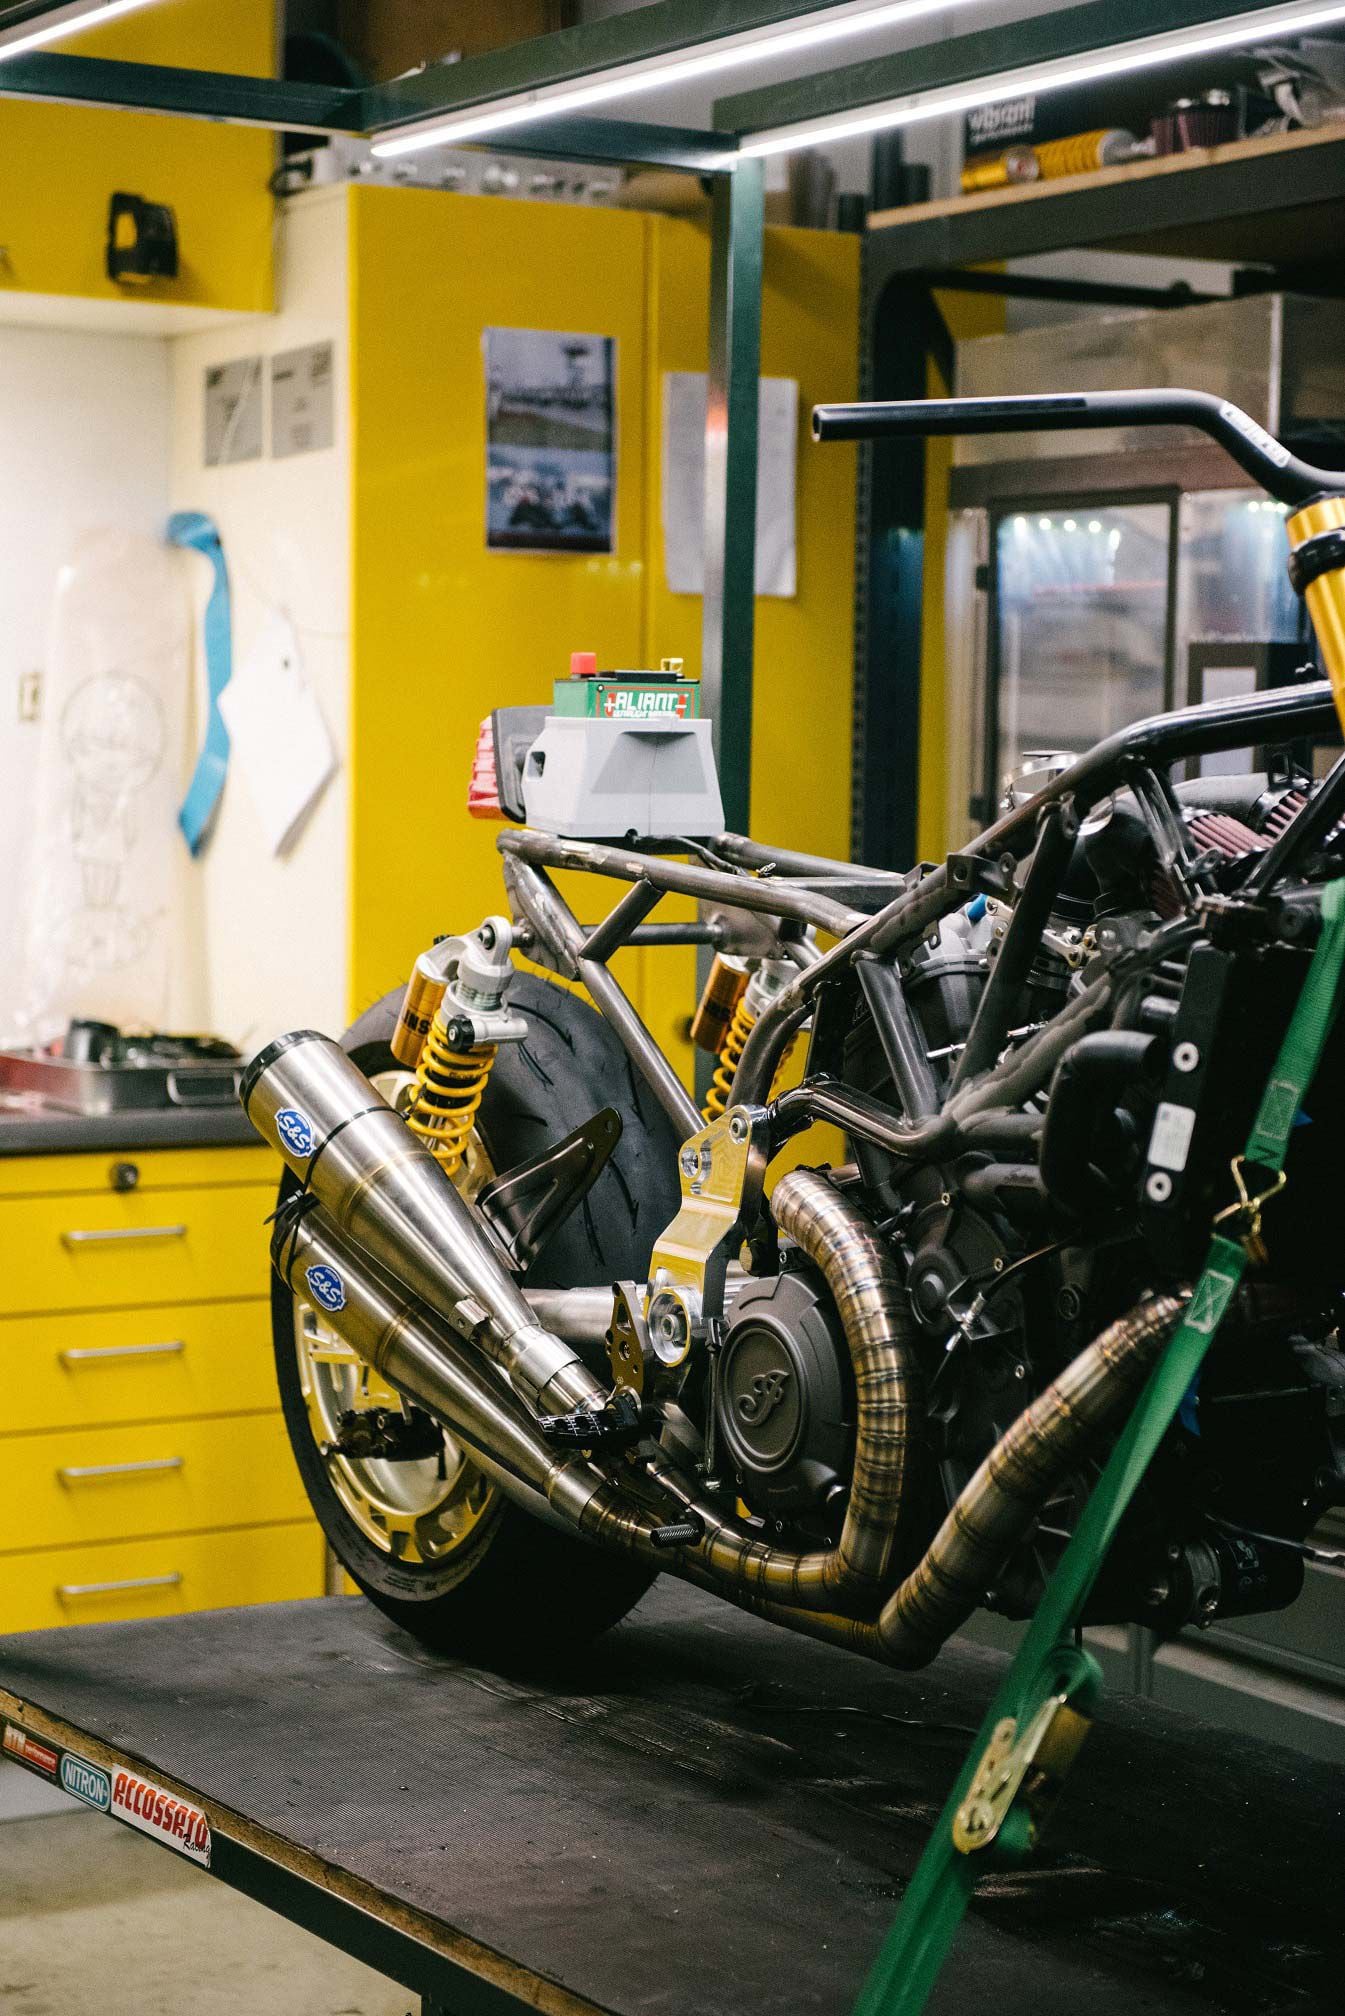 The AMA SBK bike is still in the early stages of design, but many of the components are already in place.